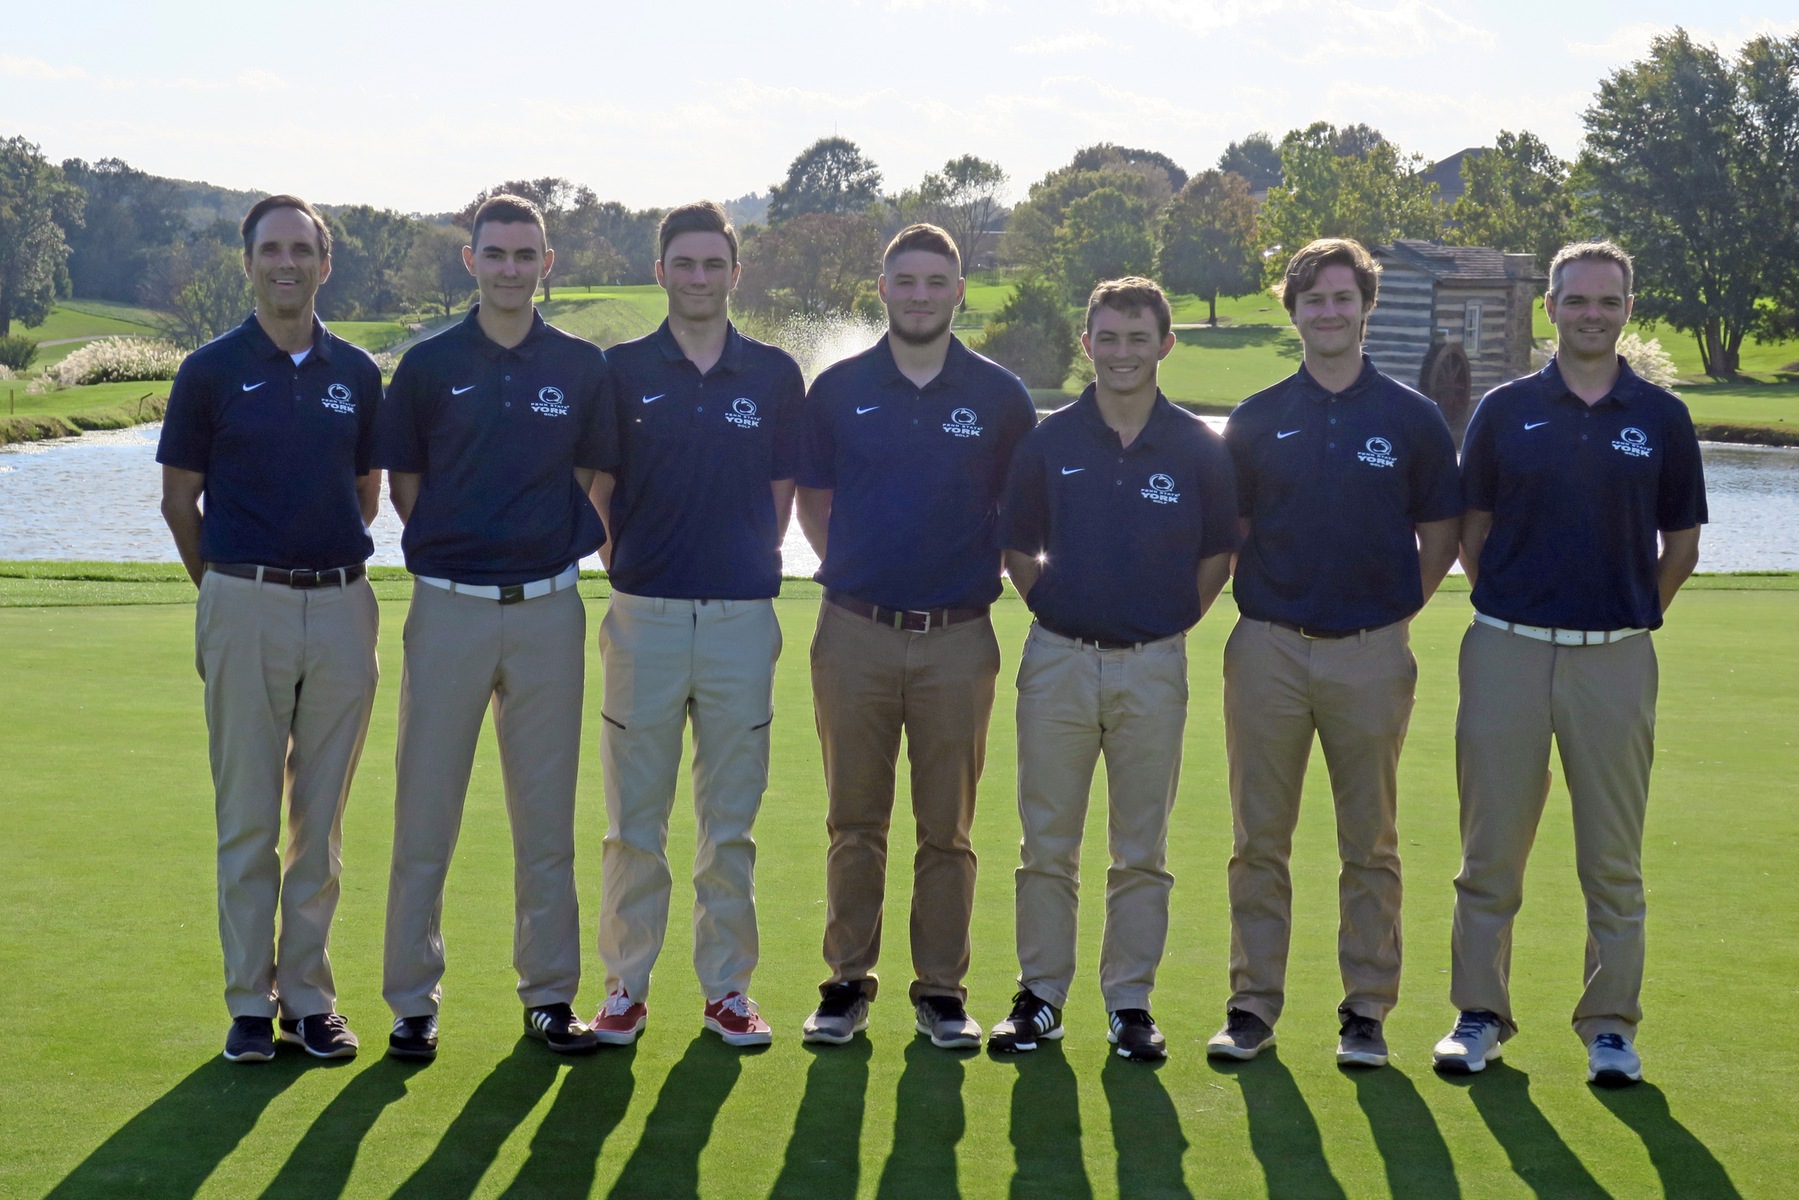 Brent Williams (center), with the 2018 Penn State York golf team.